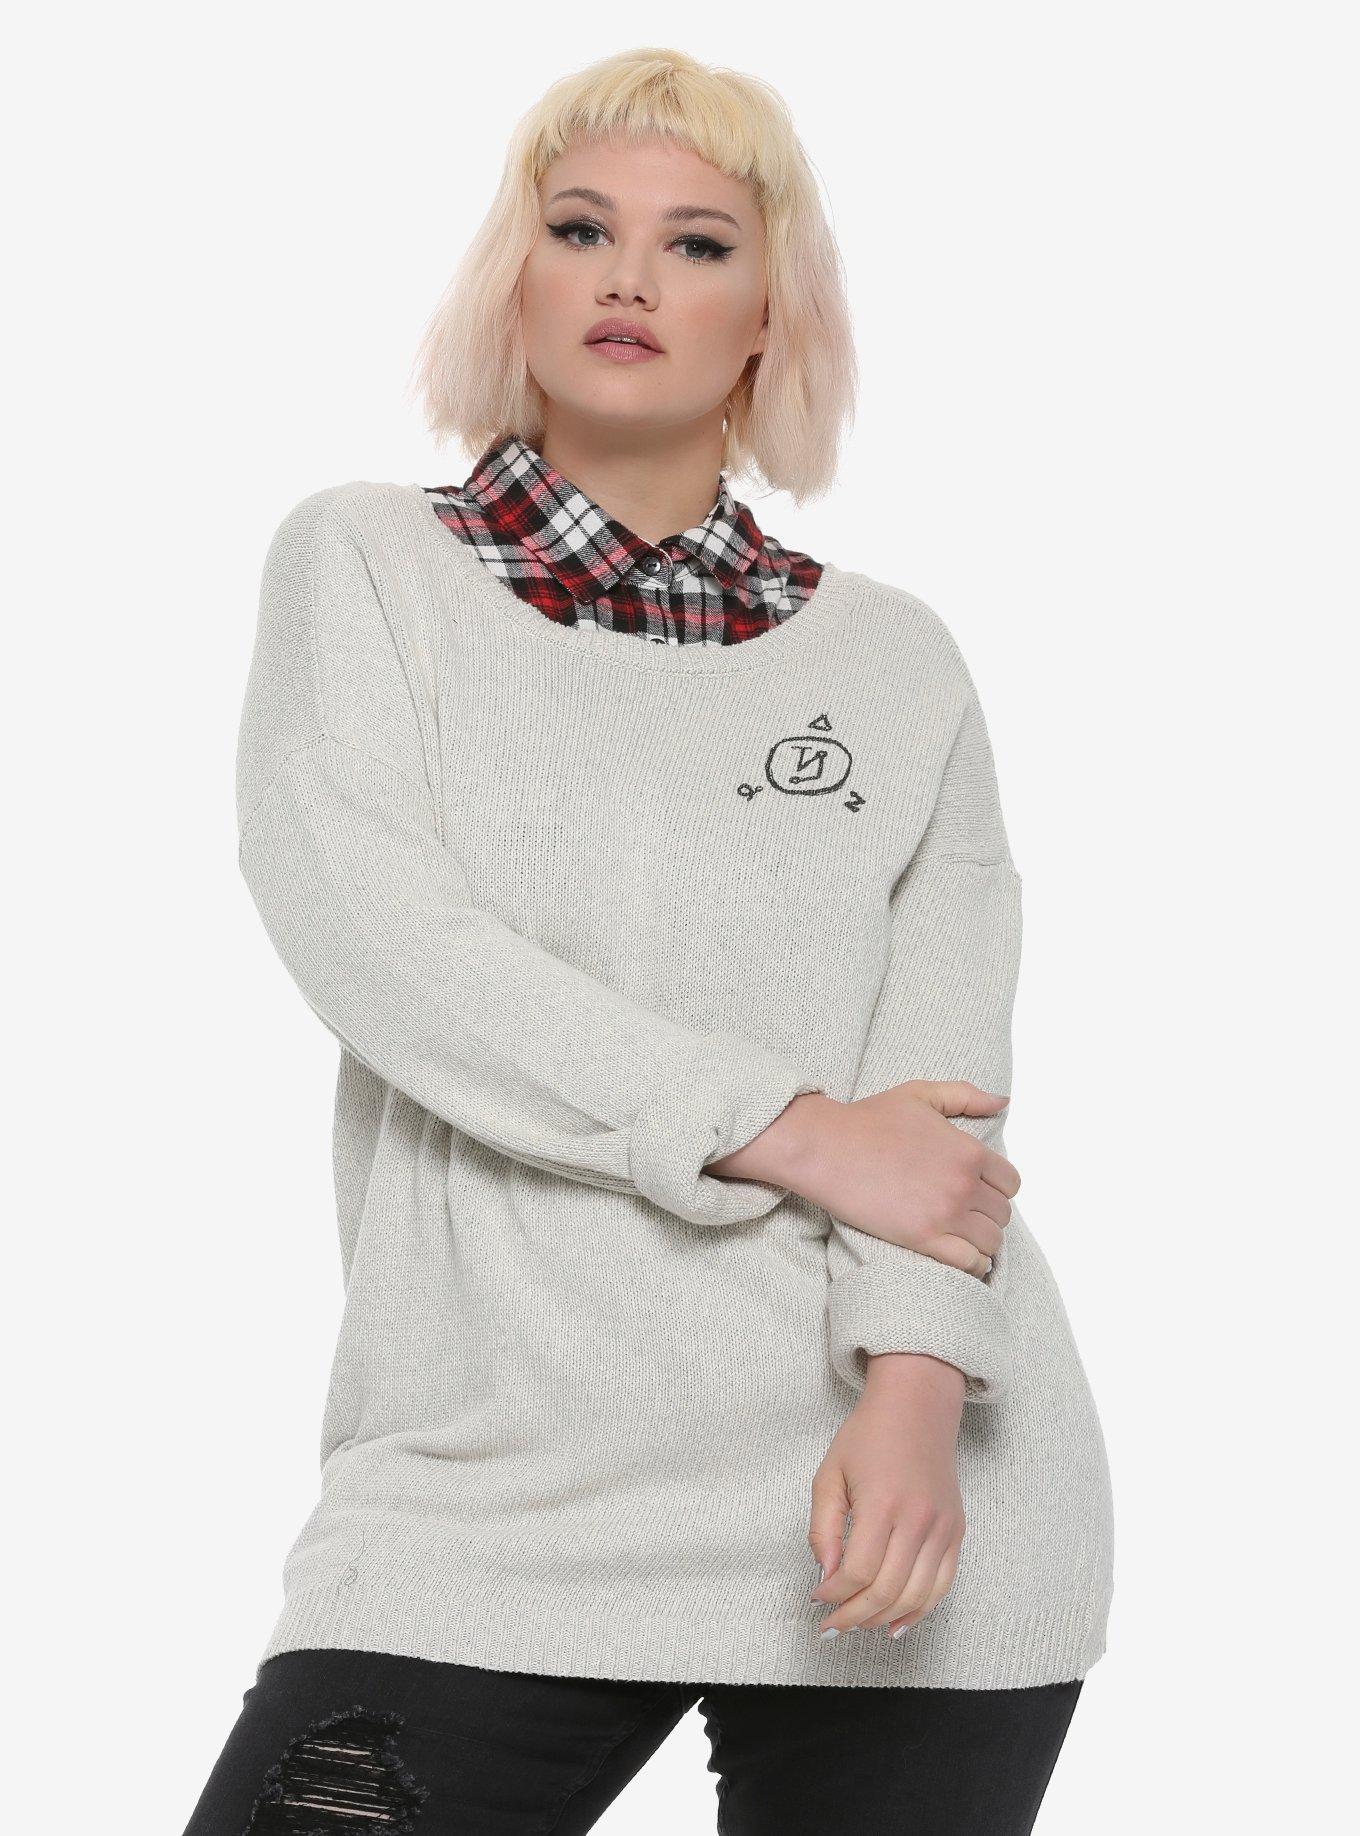 Supernatural Castiel Wings Girls Sweater Plus Size Hot Topic Exclusive, OATMEAL, hi-res